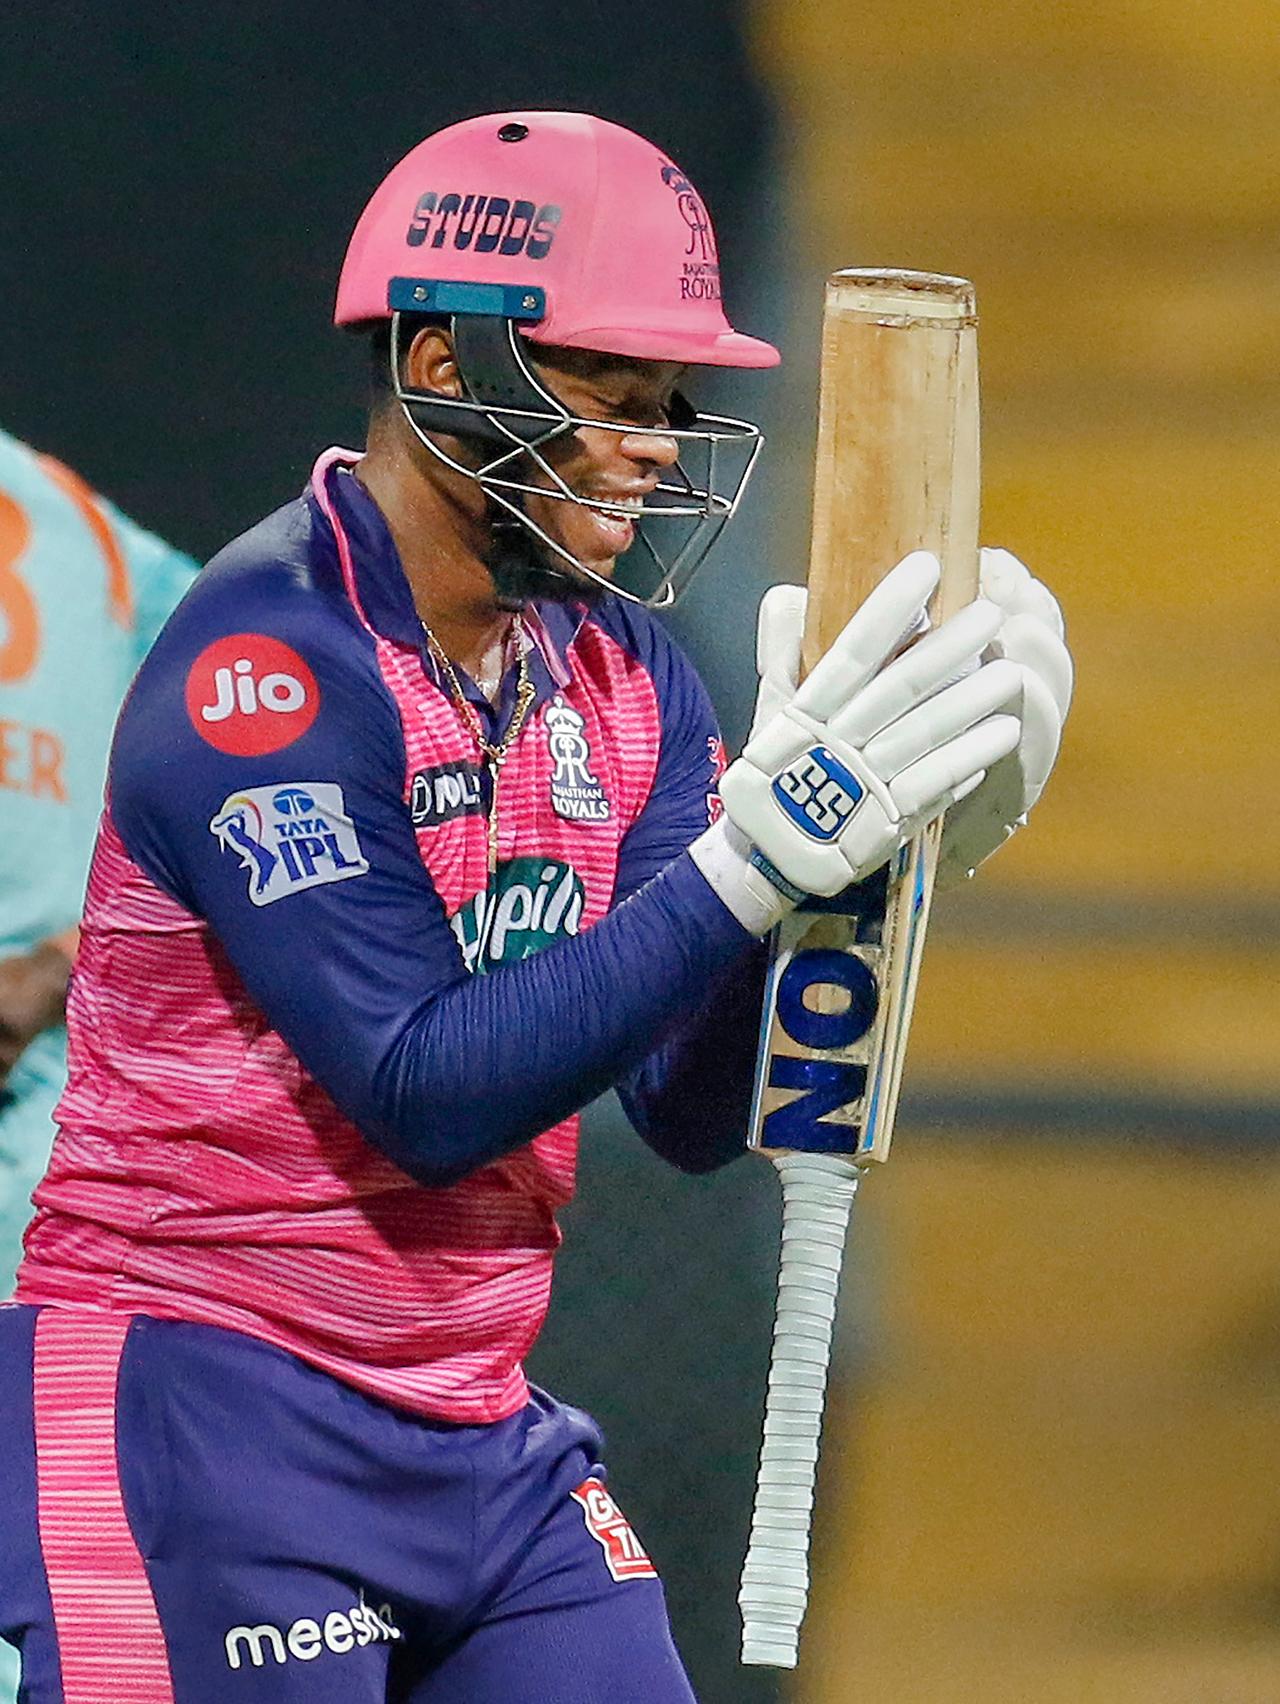 Rajasthan Royals batsman Shimron Hetmyer was the saving grace for RR with his vital 59 runs off 36 balls which included 6 sixes and a boundary. He helped them to a total of 165